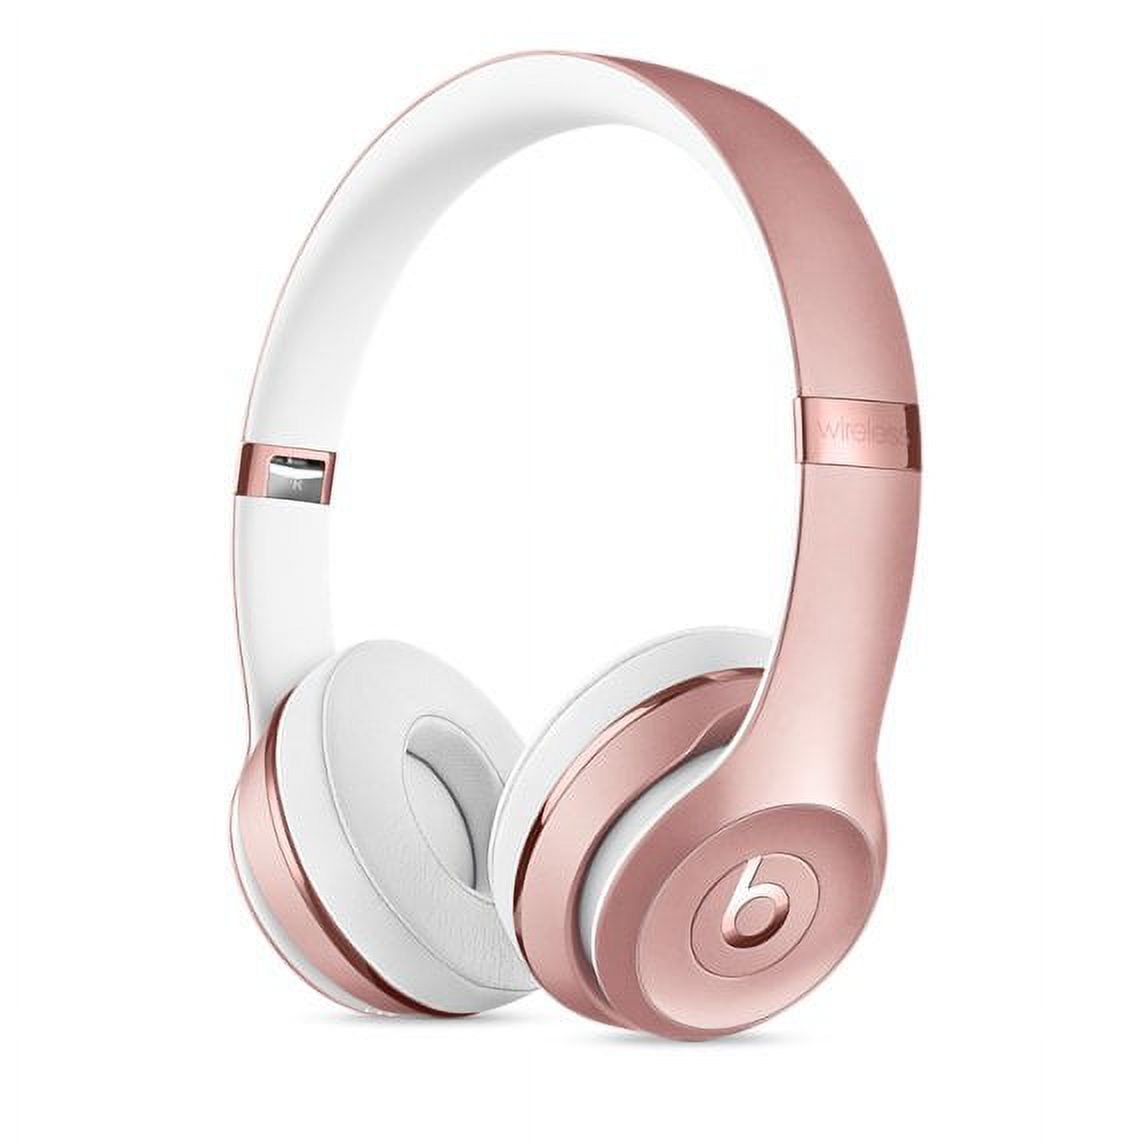 Restored Beats Solo 3 Wireless OnEar Headphones Rose Gold (Refurbished) - image 1 of 5